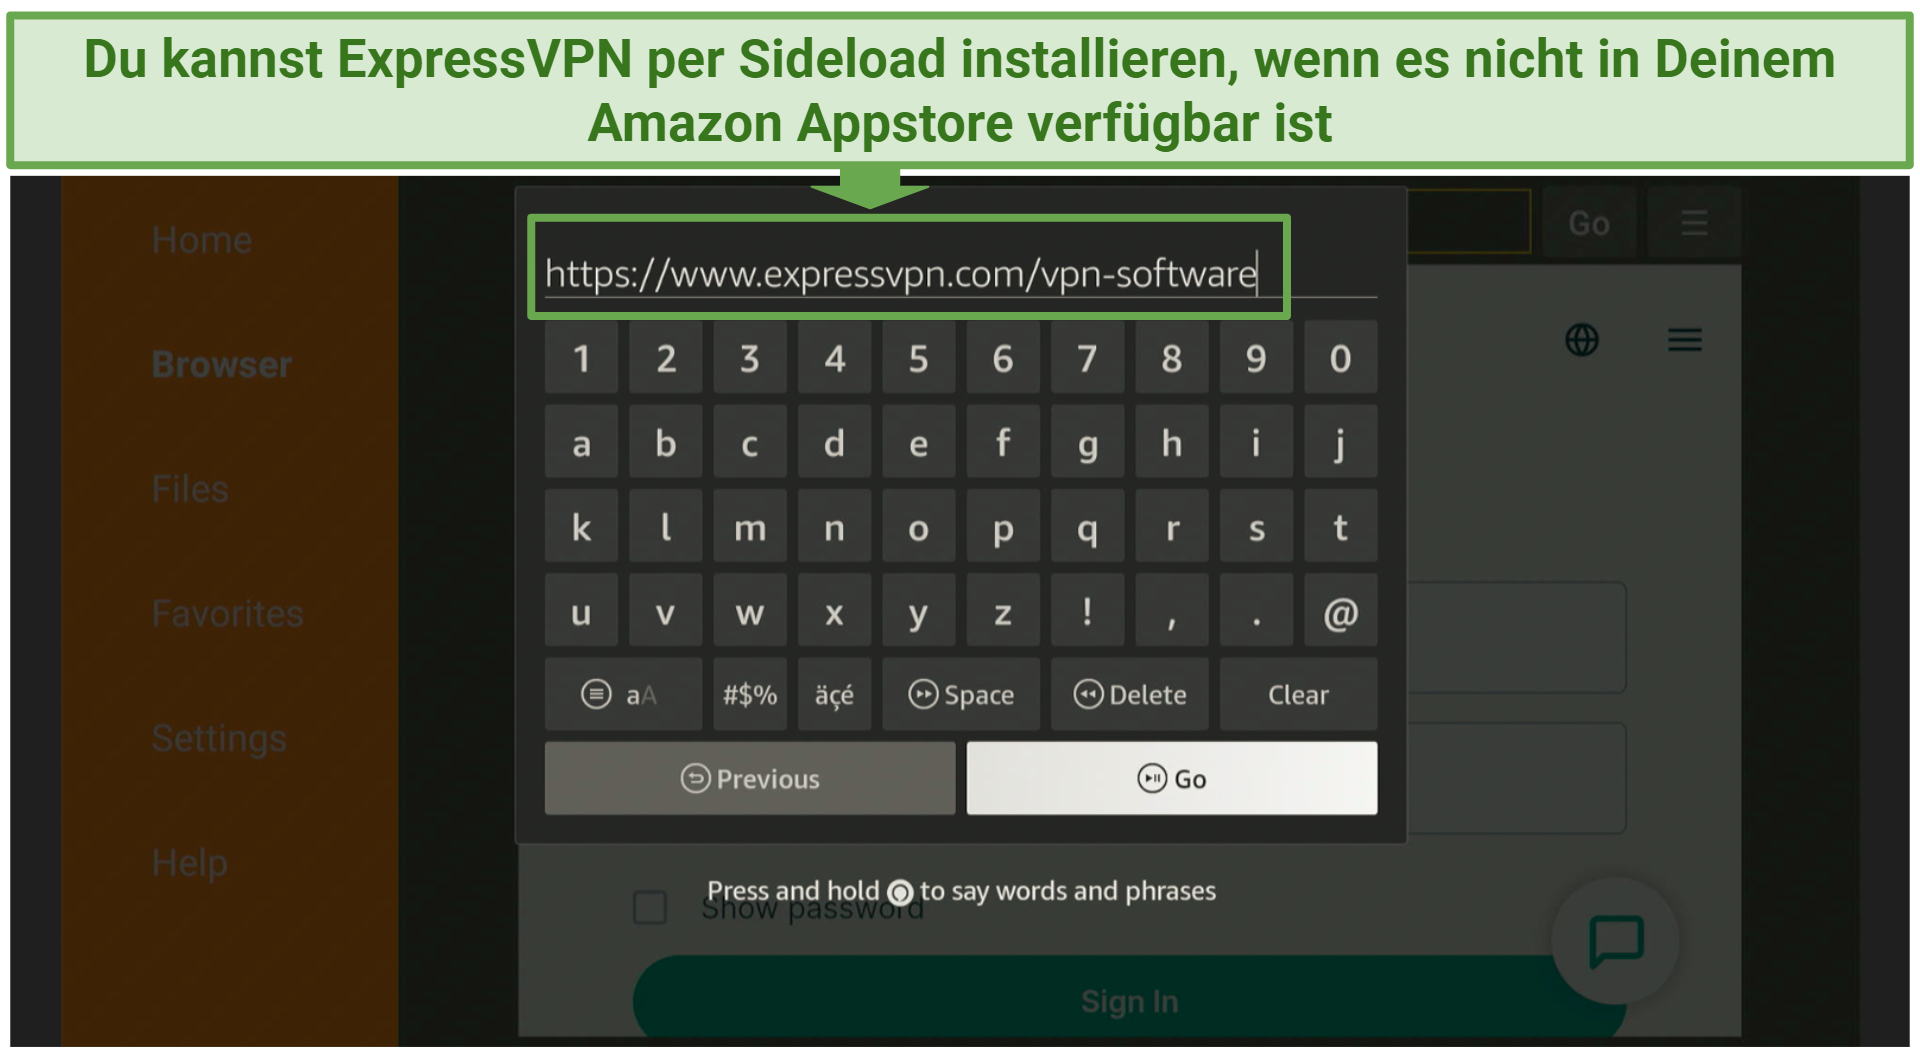 A screenshot showing you can sideload ExpressVPN on Firestick from the official website